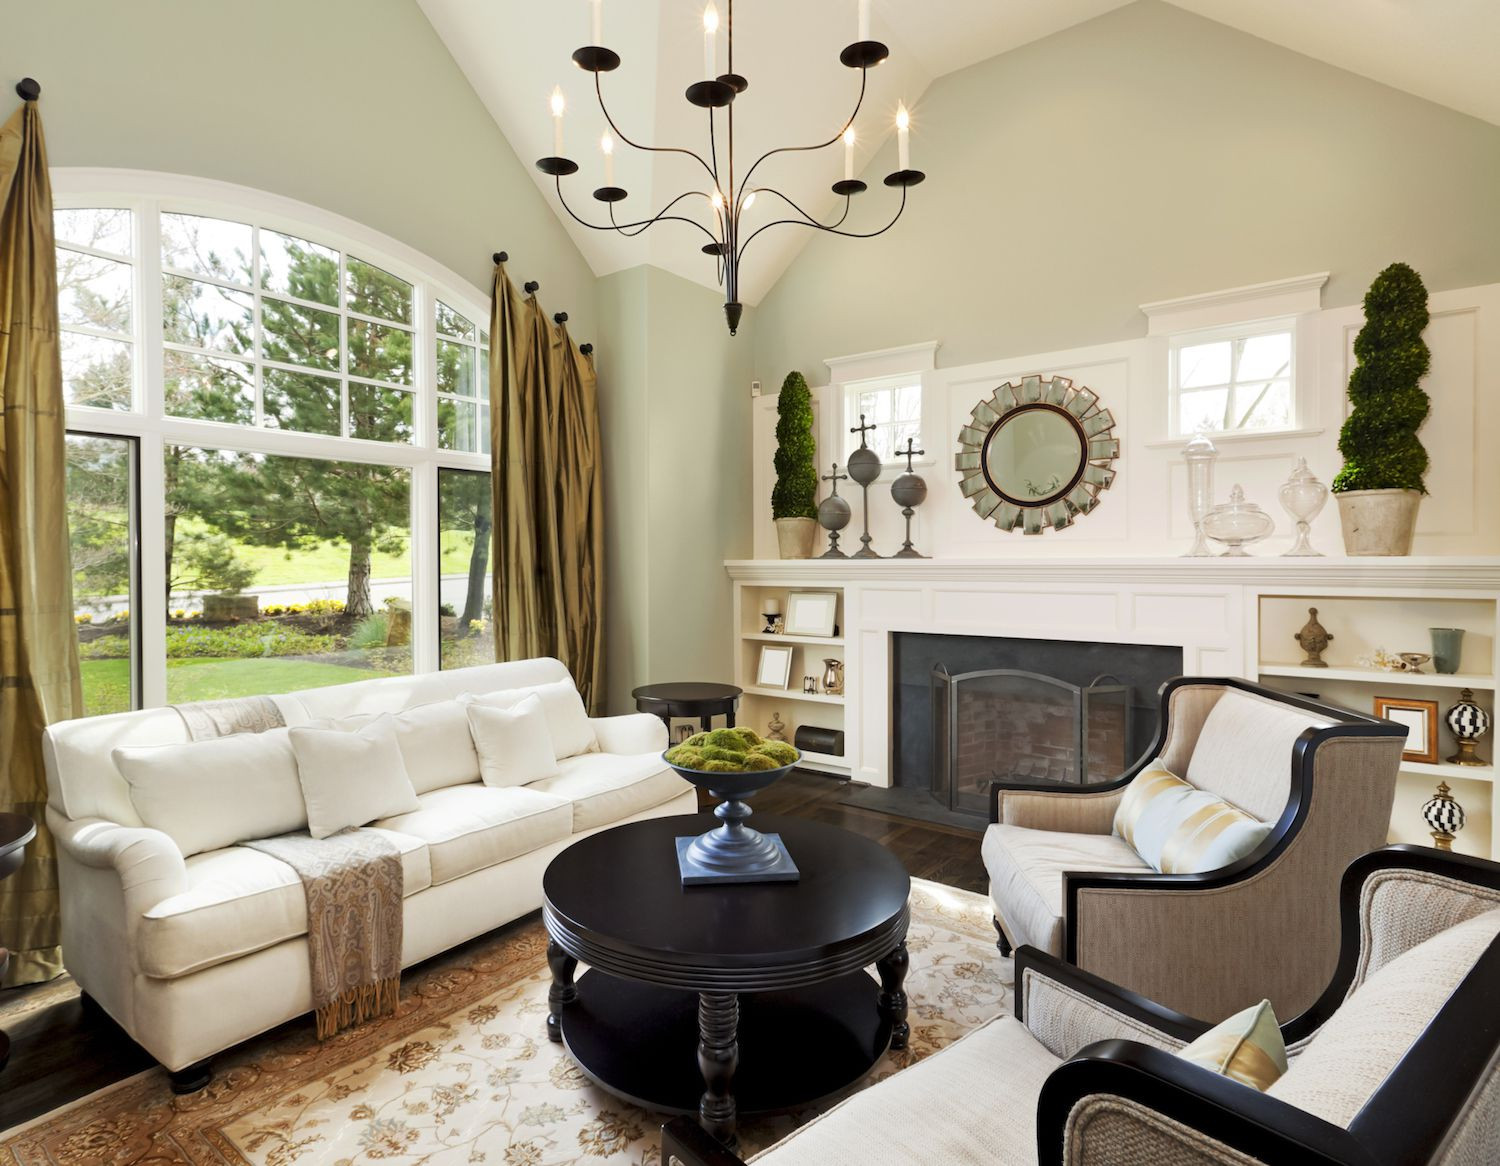 Home Decorations For Living Room
 How to Stage Your Open House to Appeal to Buyers